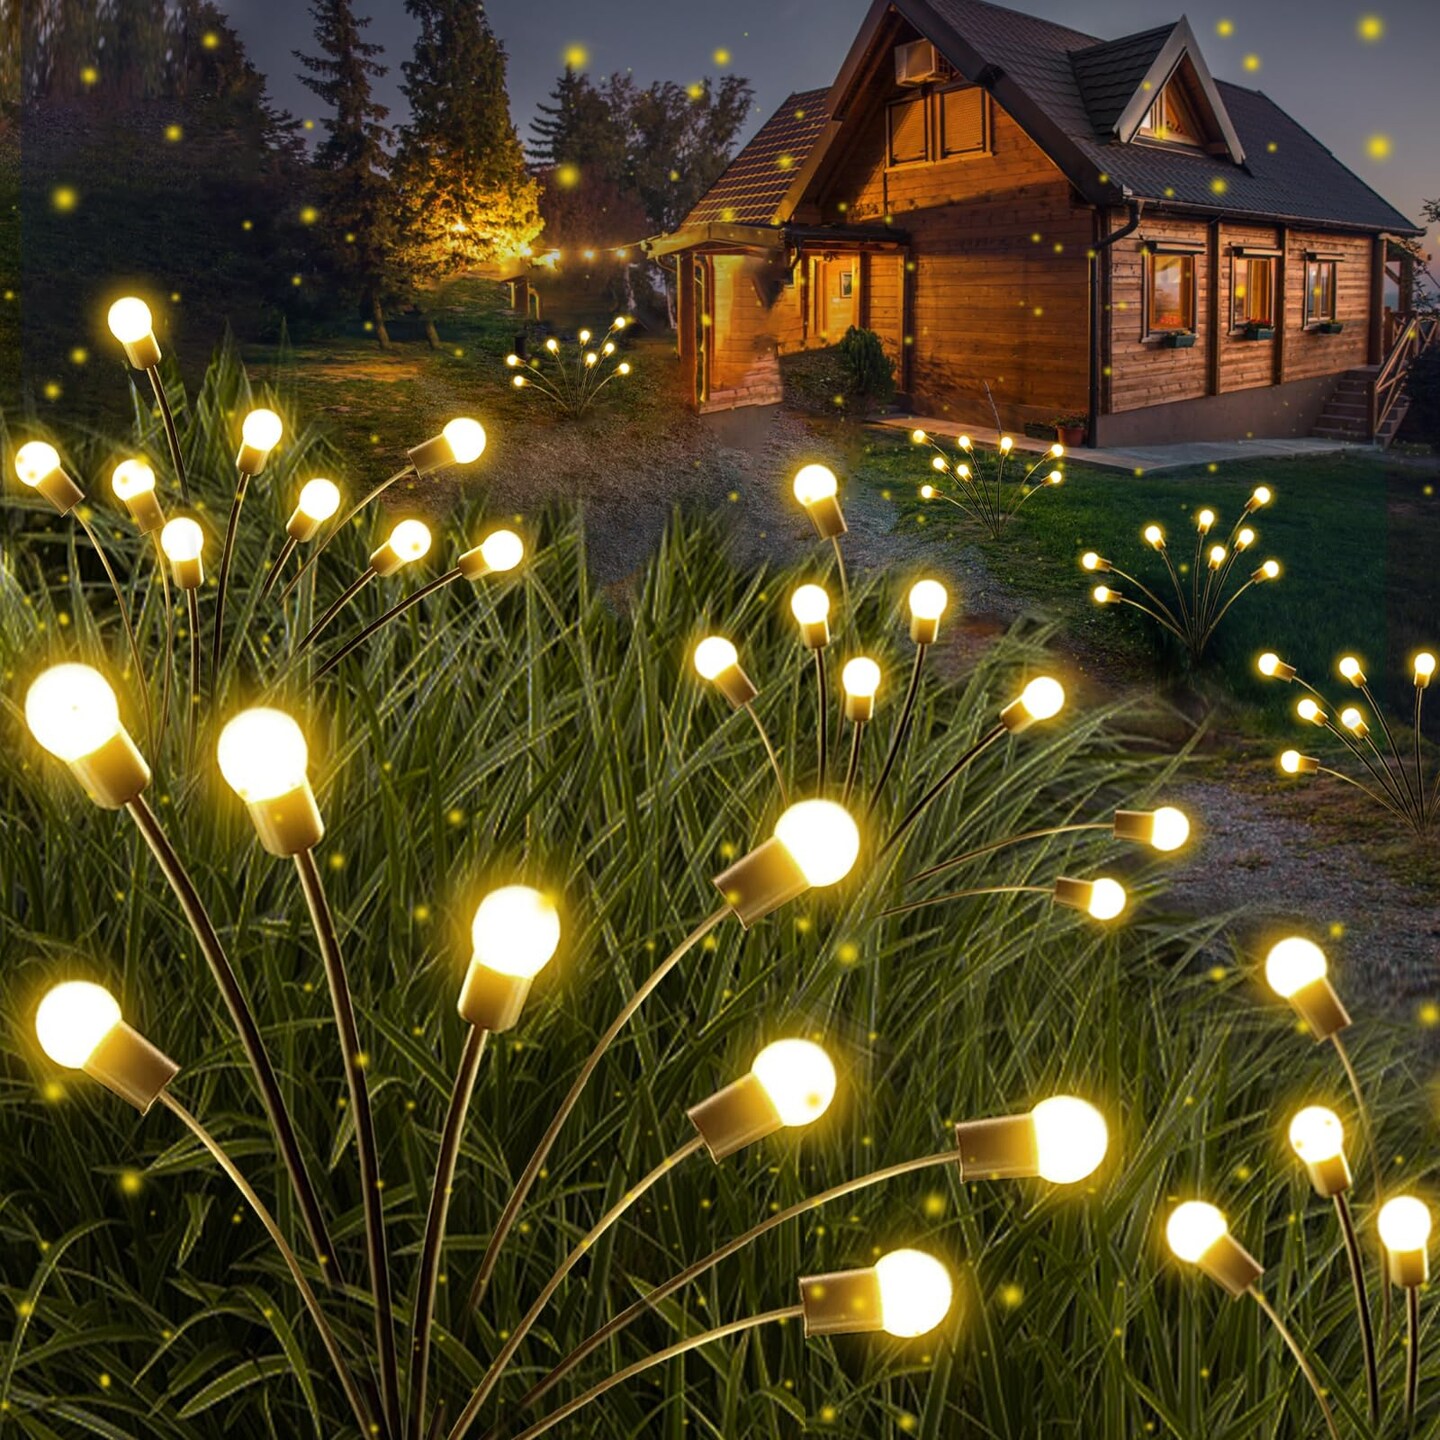 4-Pack Solar Garden Lights Outdoor, Upgraded 32 LED Firefly Solar Lights for Outside, Sway by Wind, Waterproof Solar Powered Outdoor Lights for Yard Garden Decor Party Xmas Decorations (Warm White)